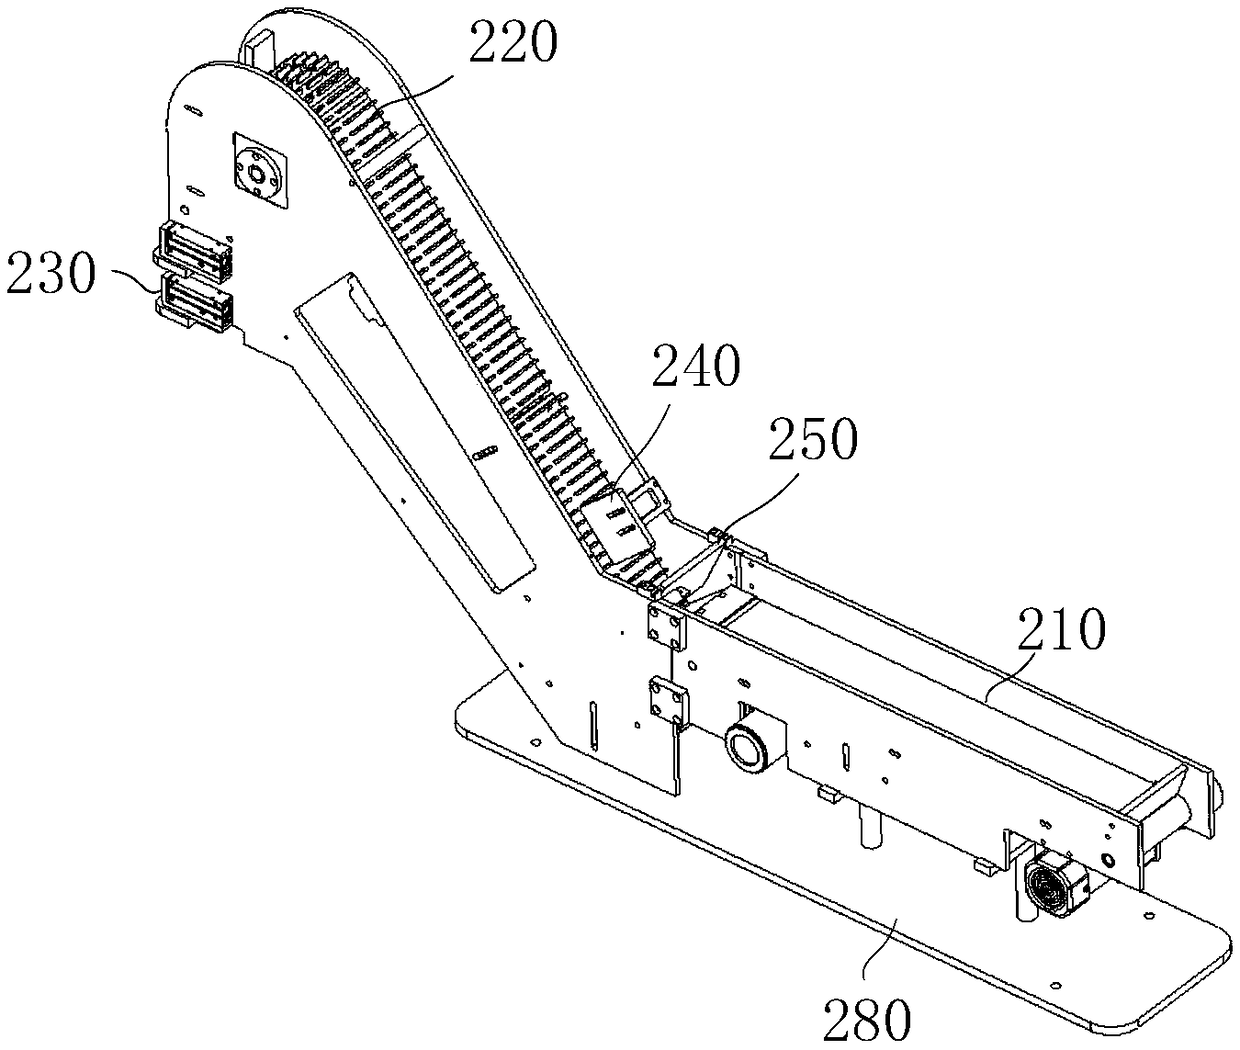 Feeding mechanism used for finished pen packaging